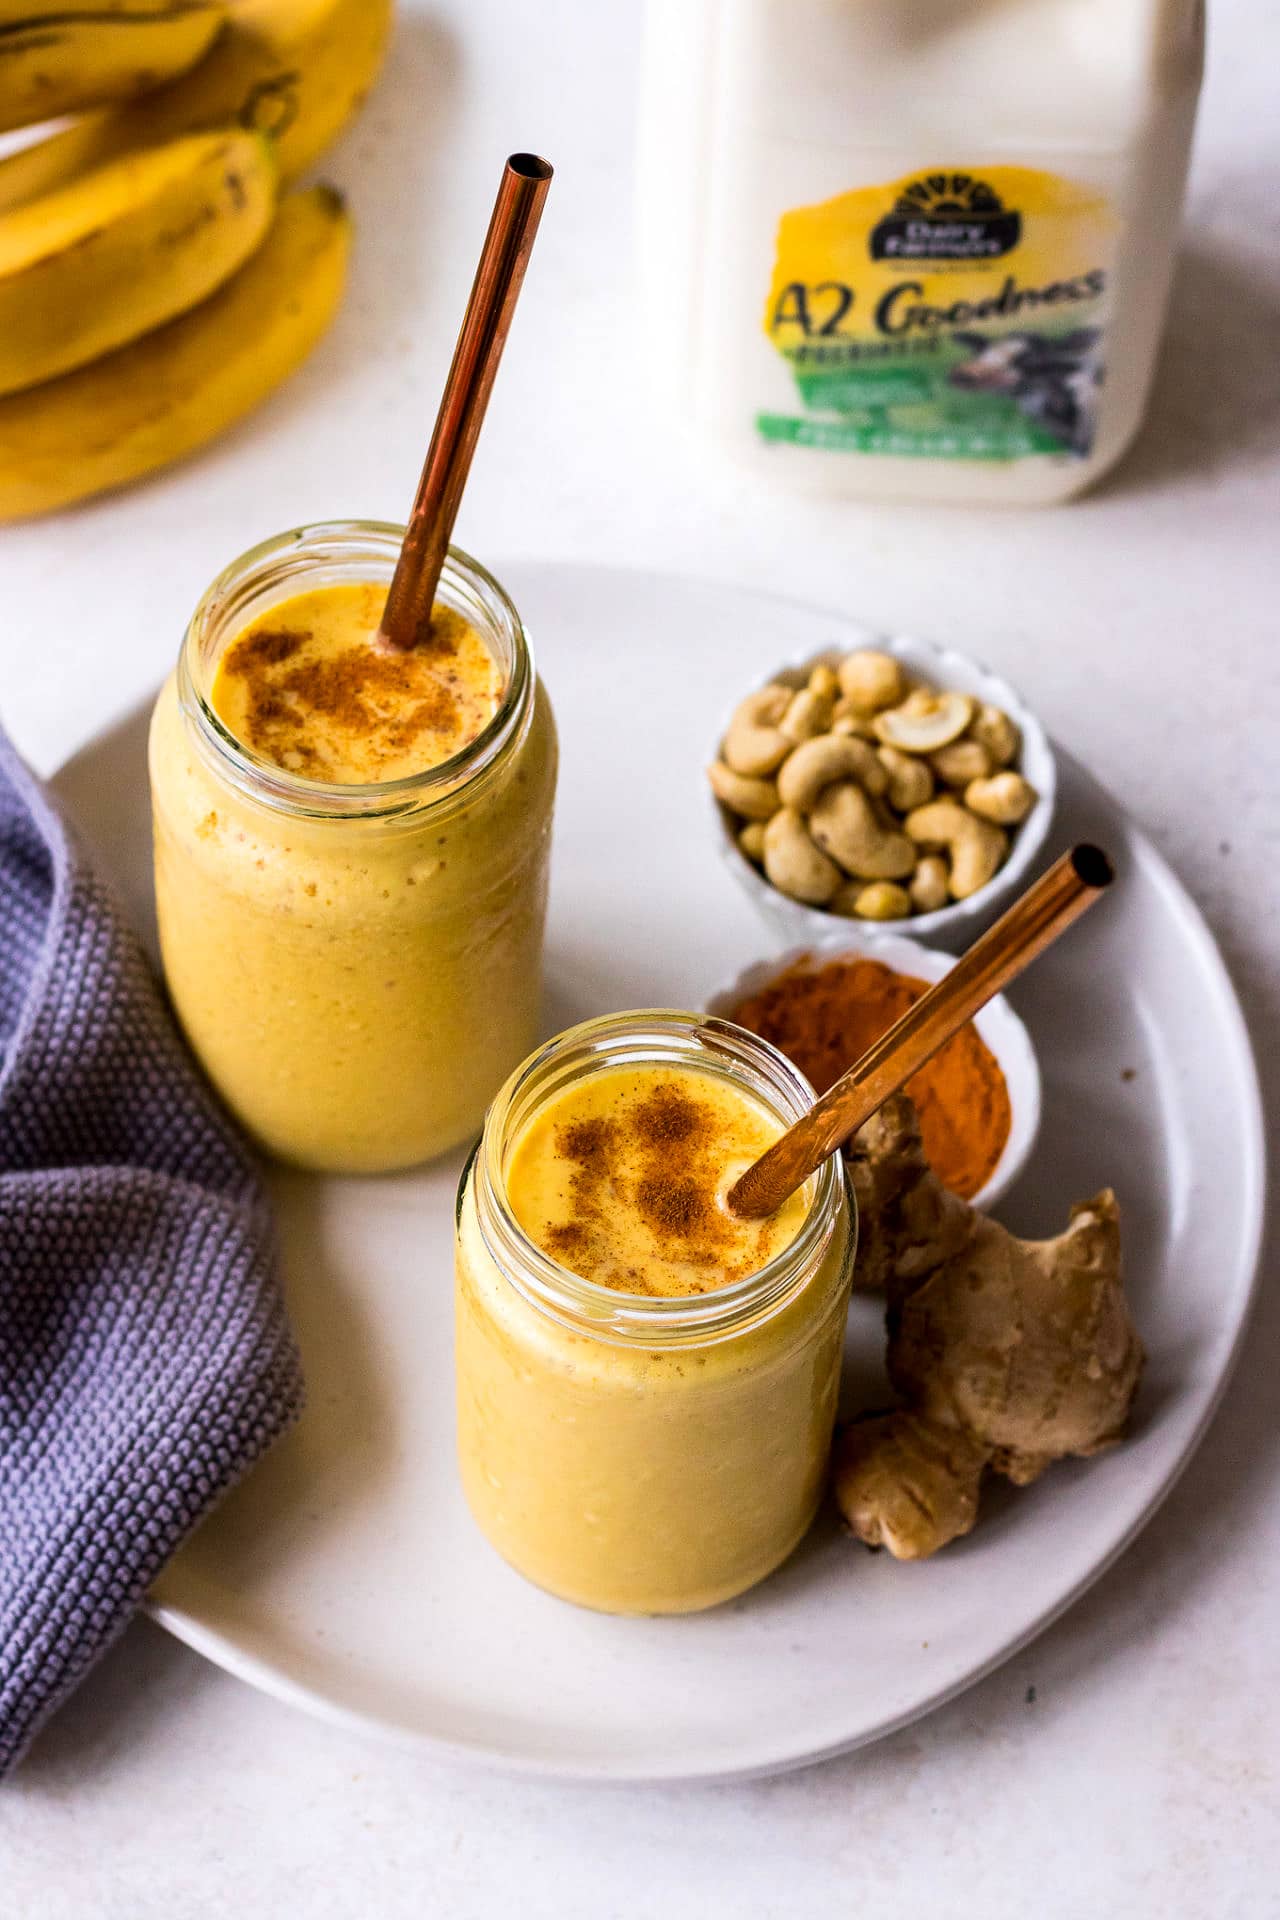 Golden milk smoothie in glass jars with copper straws, Dairy Farmers milk in the background